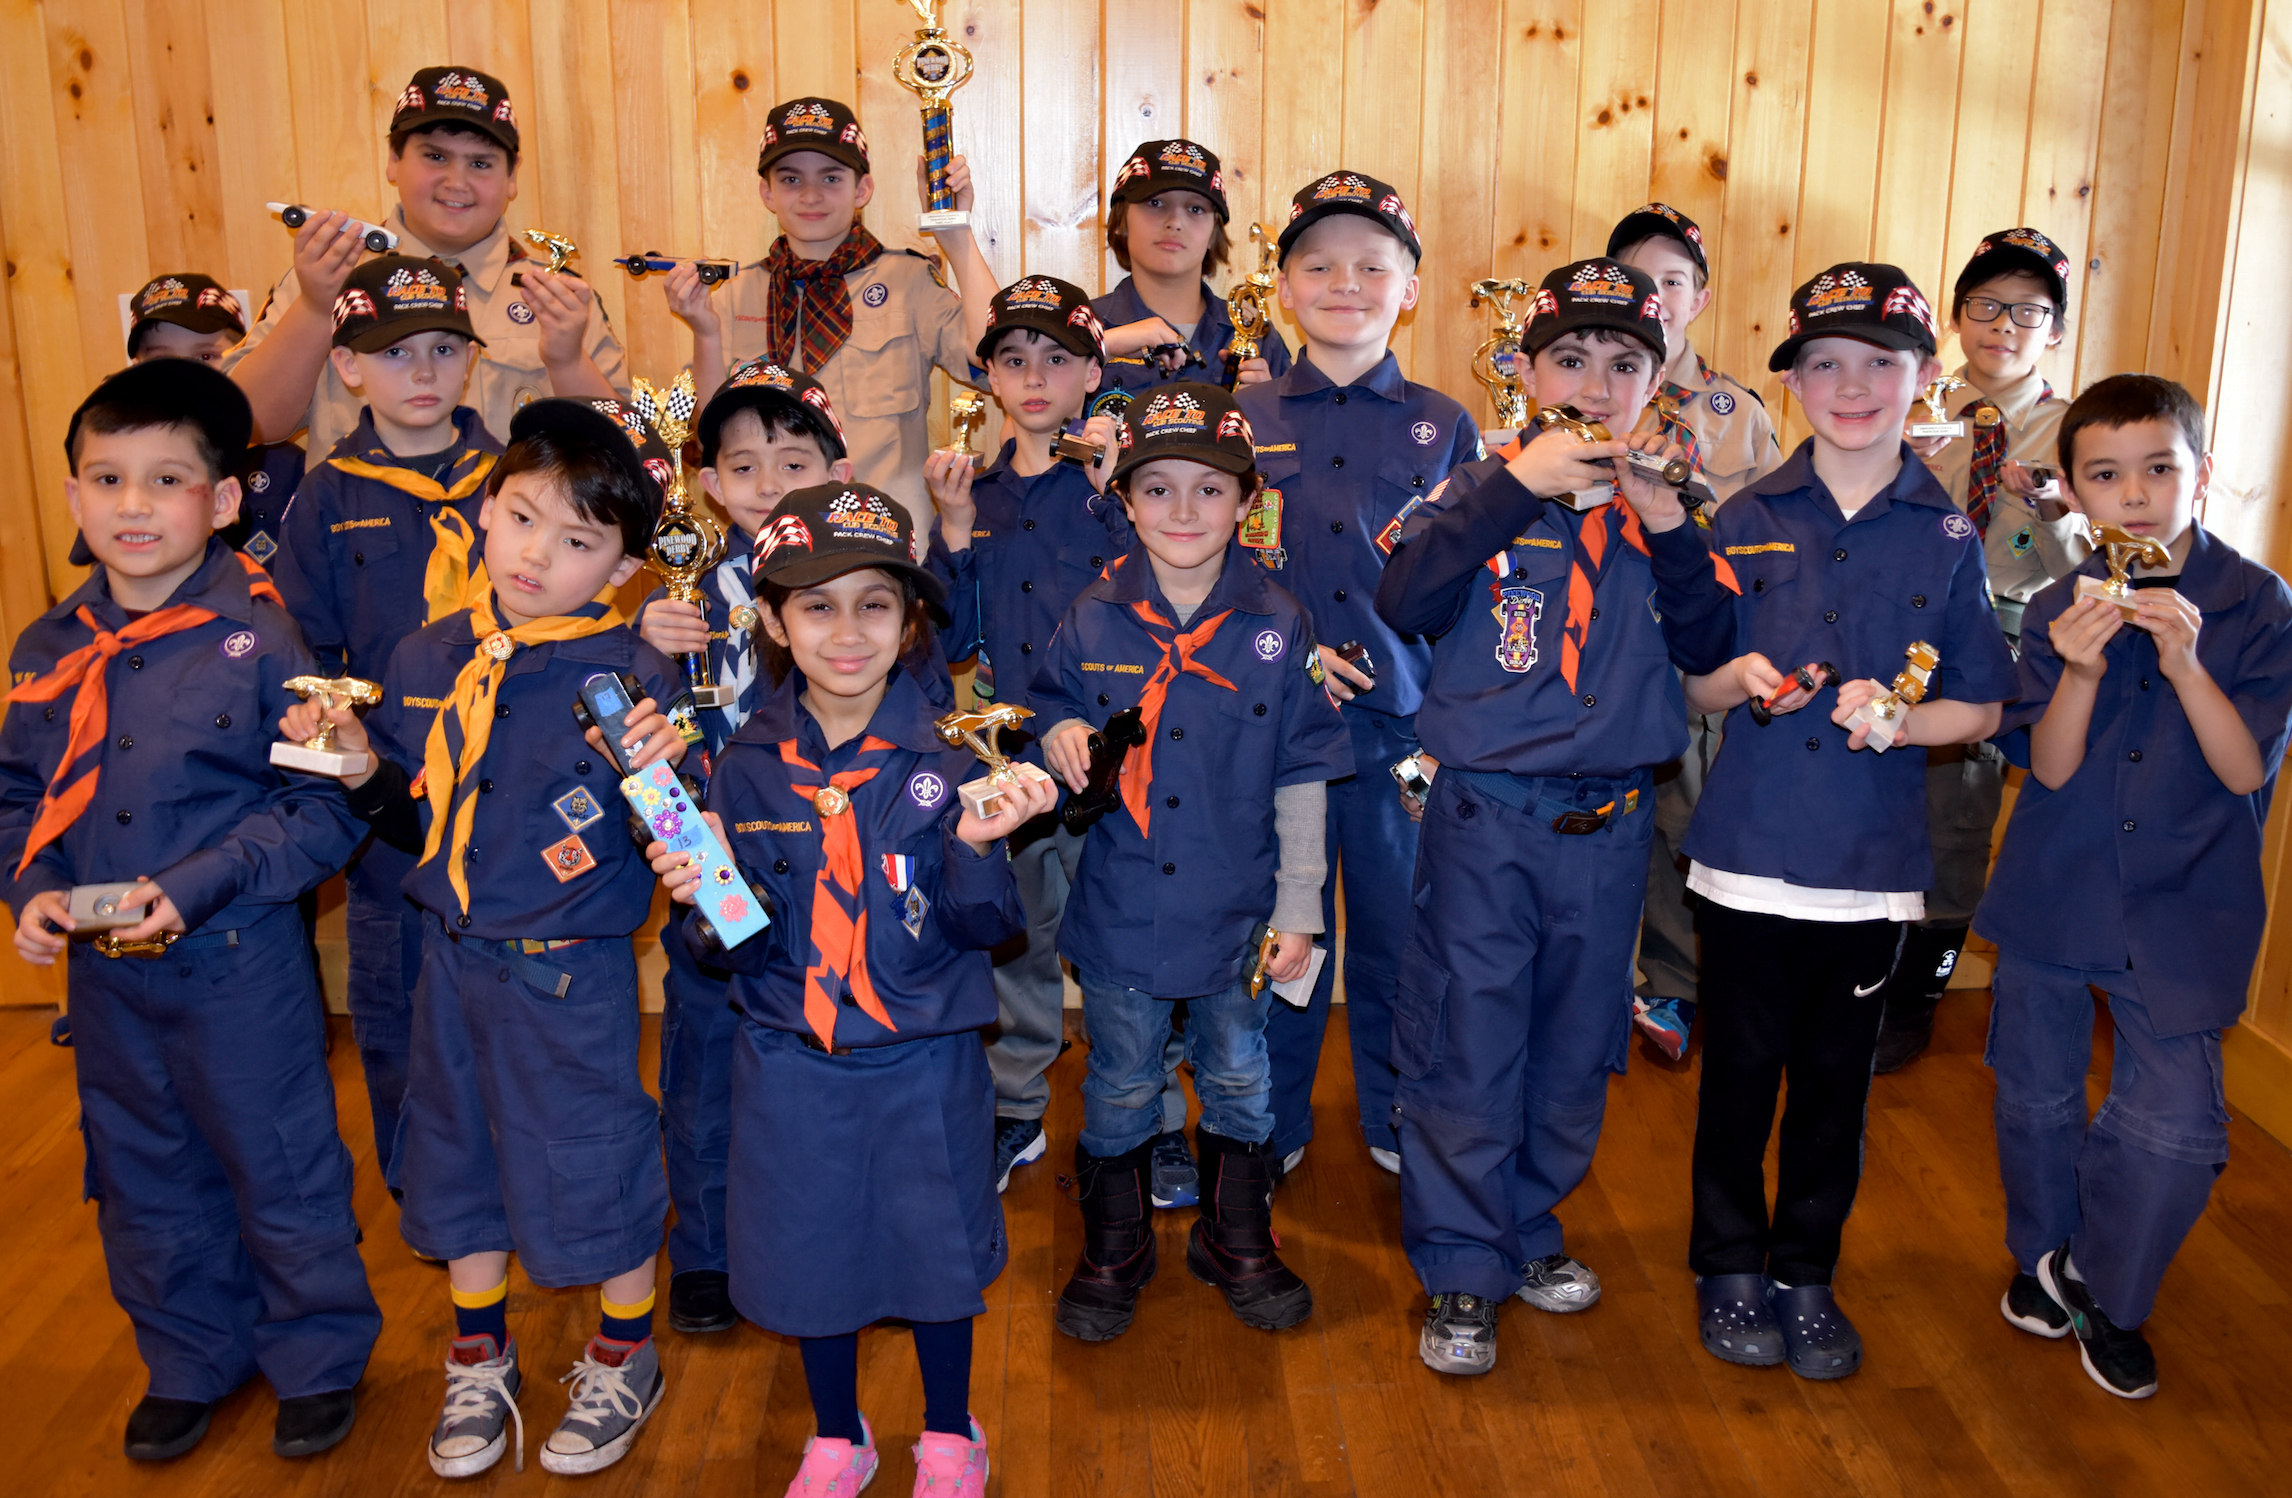 Vanya Kapur, the first girl eligible and to quality to race in a Greenwich Council Pinewood Derby Championship, with fellow Cub Scouts at Seton Scout Reservation. Photo credit: Ray Garrison